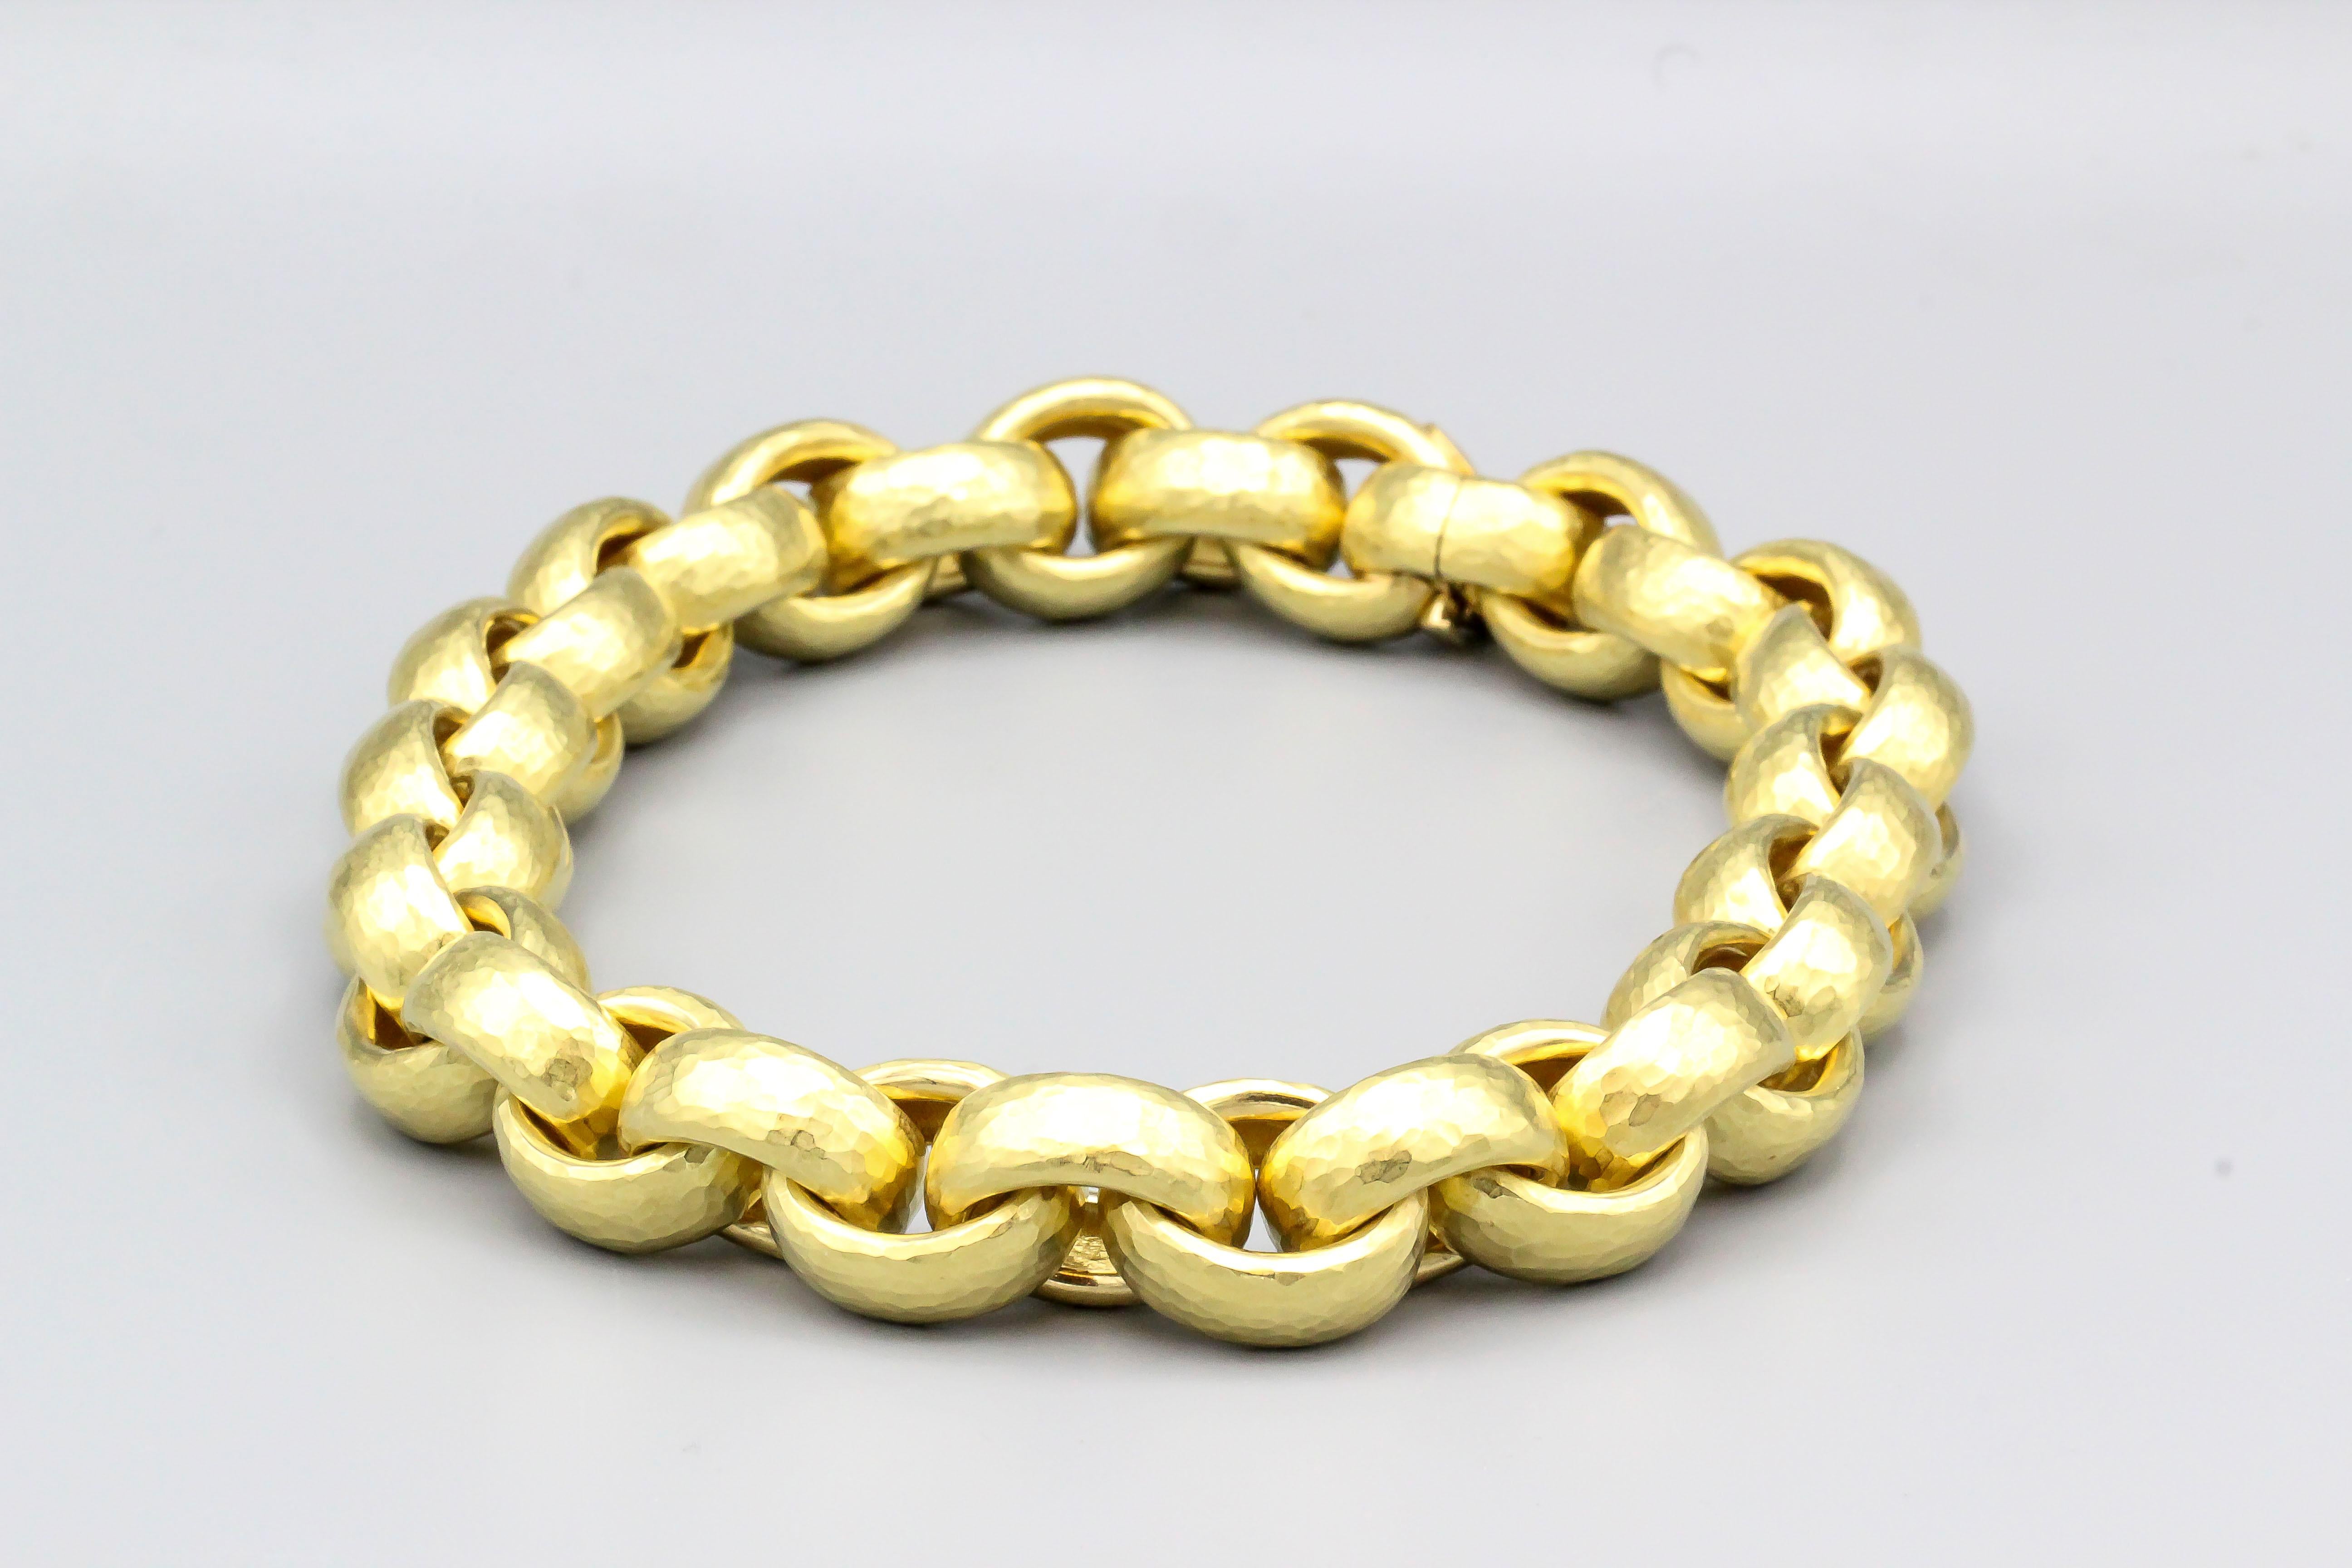 Fine 18K yellow gold hammered link necklace by Tiffany & Co. Paloma Picasso, circa 1989. Arguably the most recognizable and coveted necklace designed by Paloma Picasso, it is the largest version made of this model necklace weighing approx 200 grams.